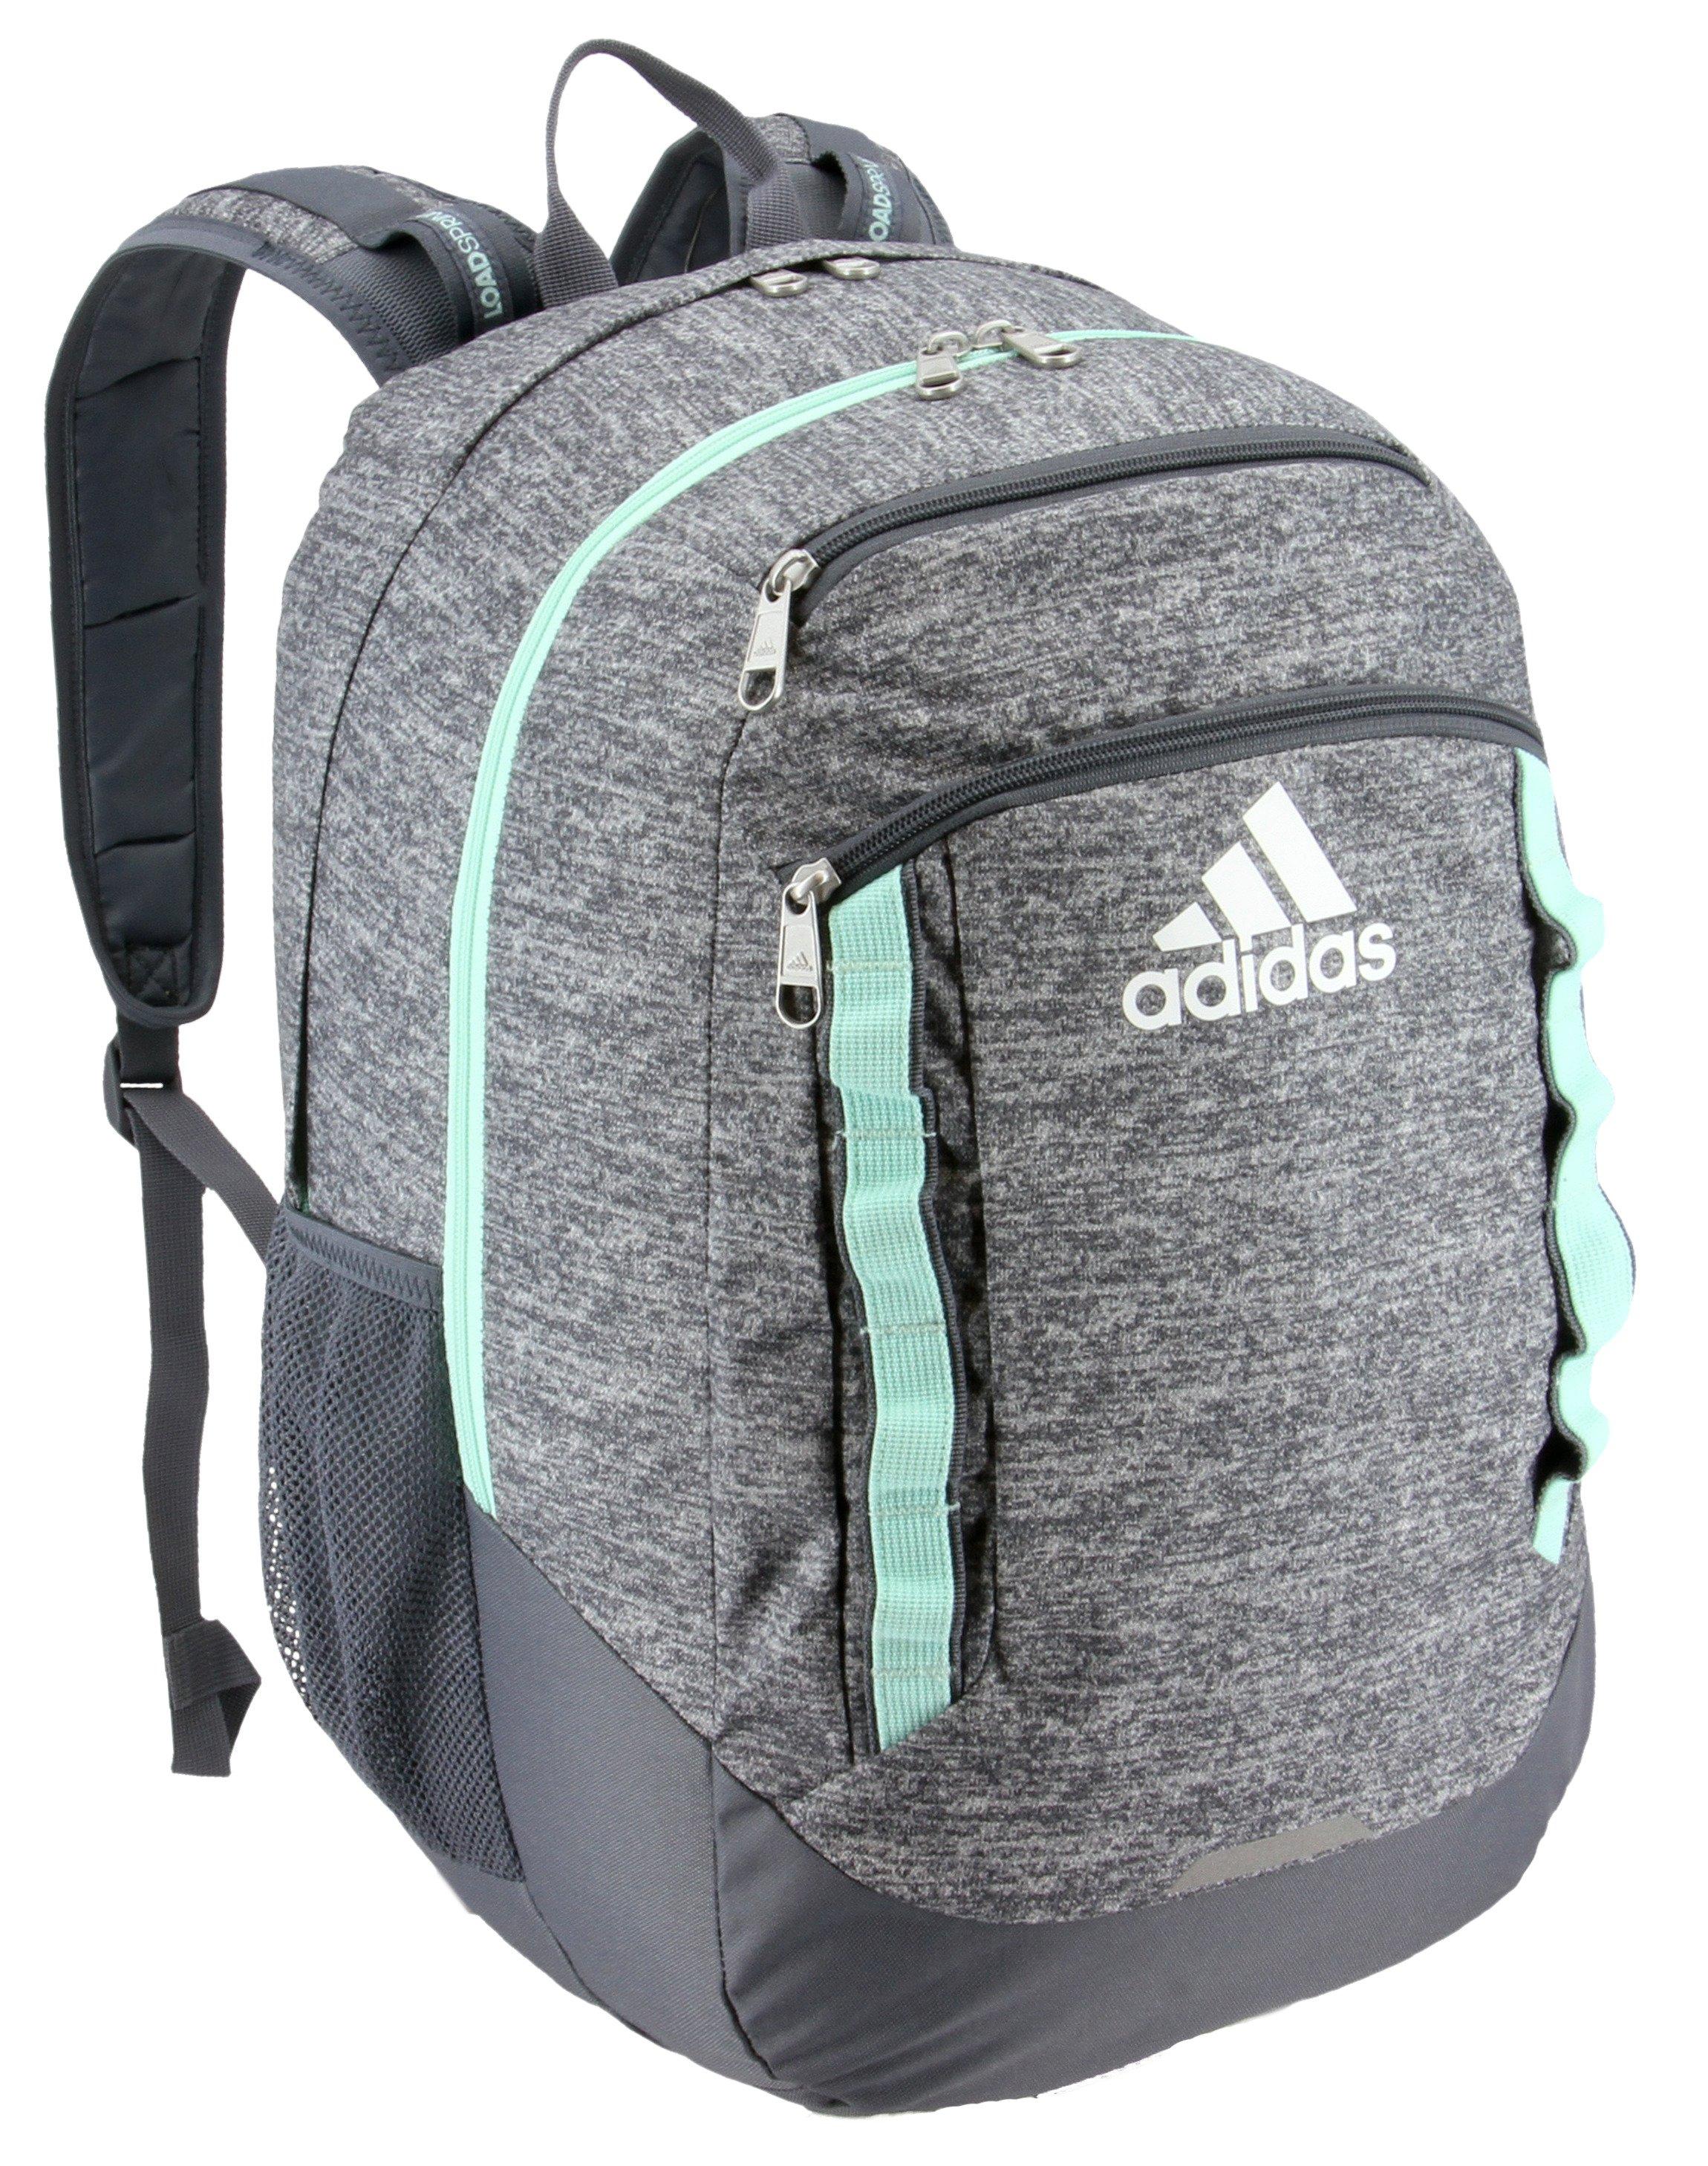 adidas excel iv backpack white